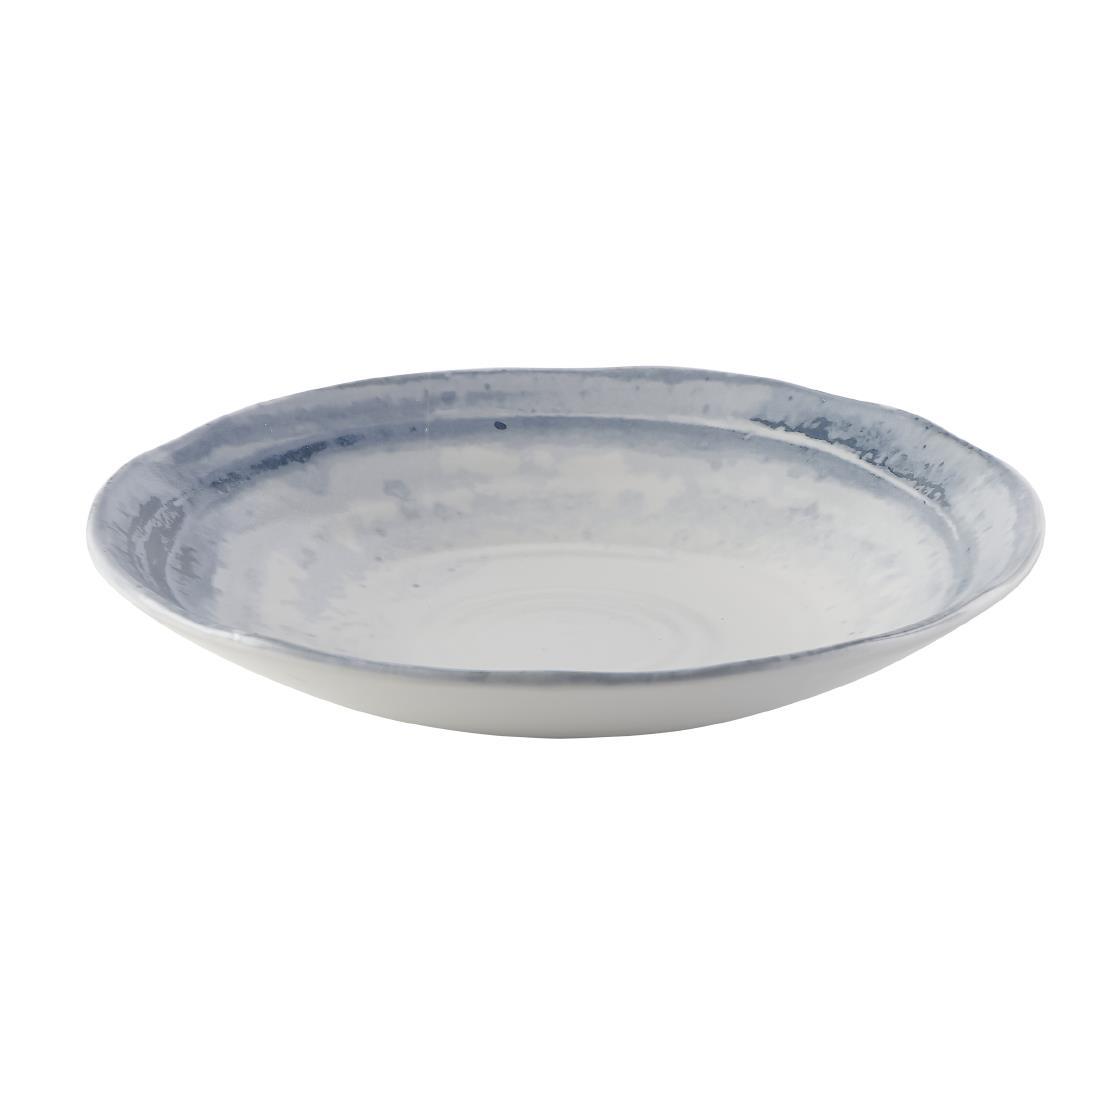 Dudson Makers Finca Limestone Organic Coupe Bowl 244mm (Pack of 12) - FS761  - 2